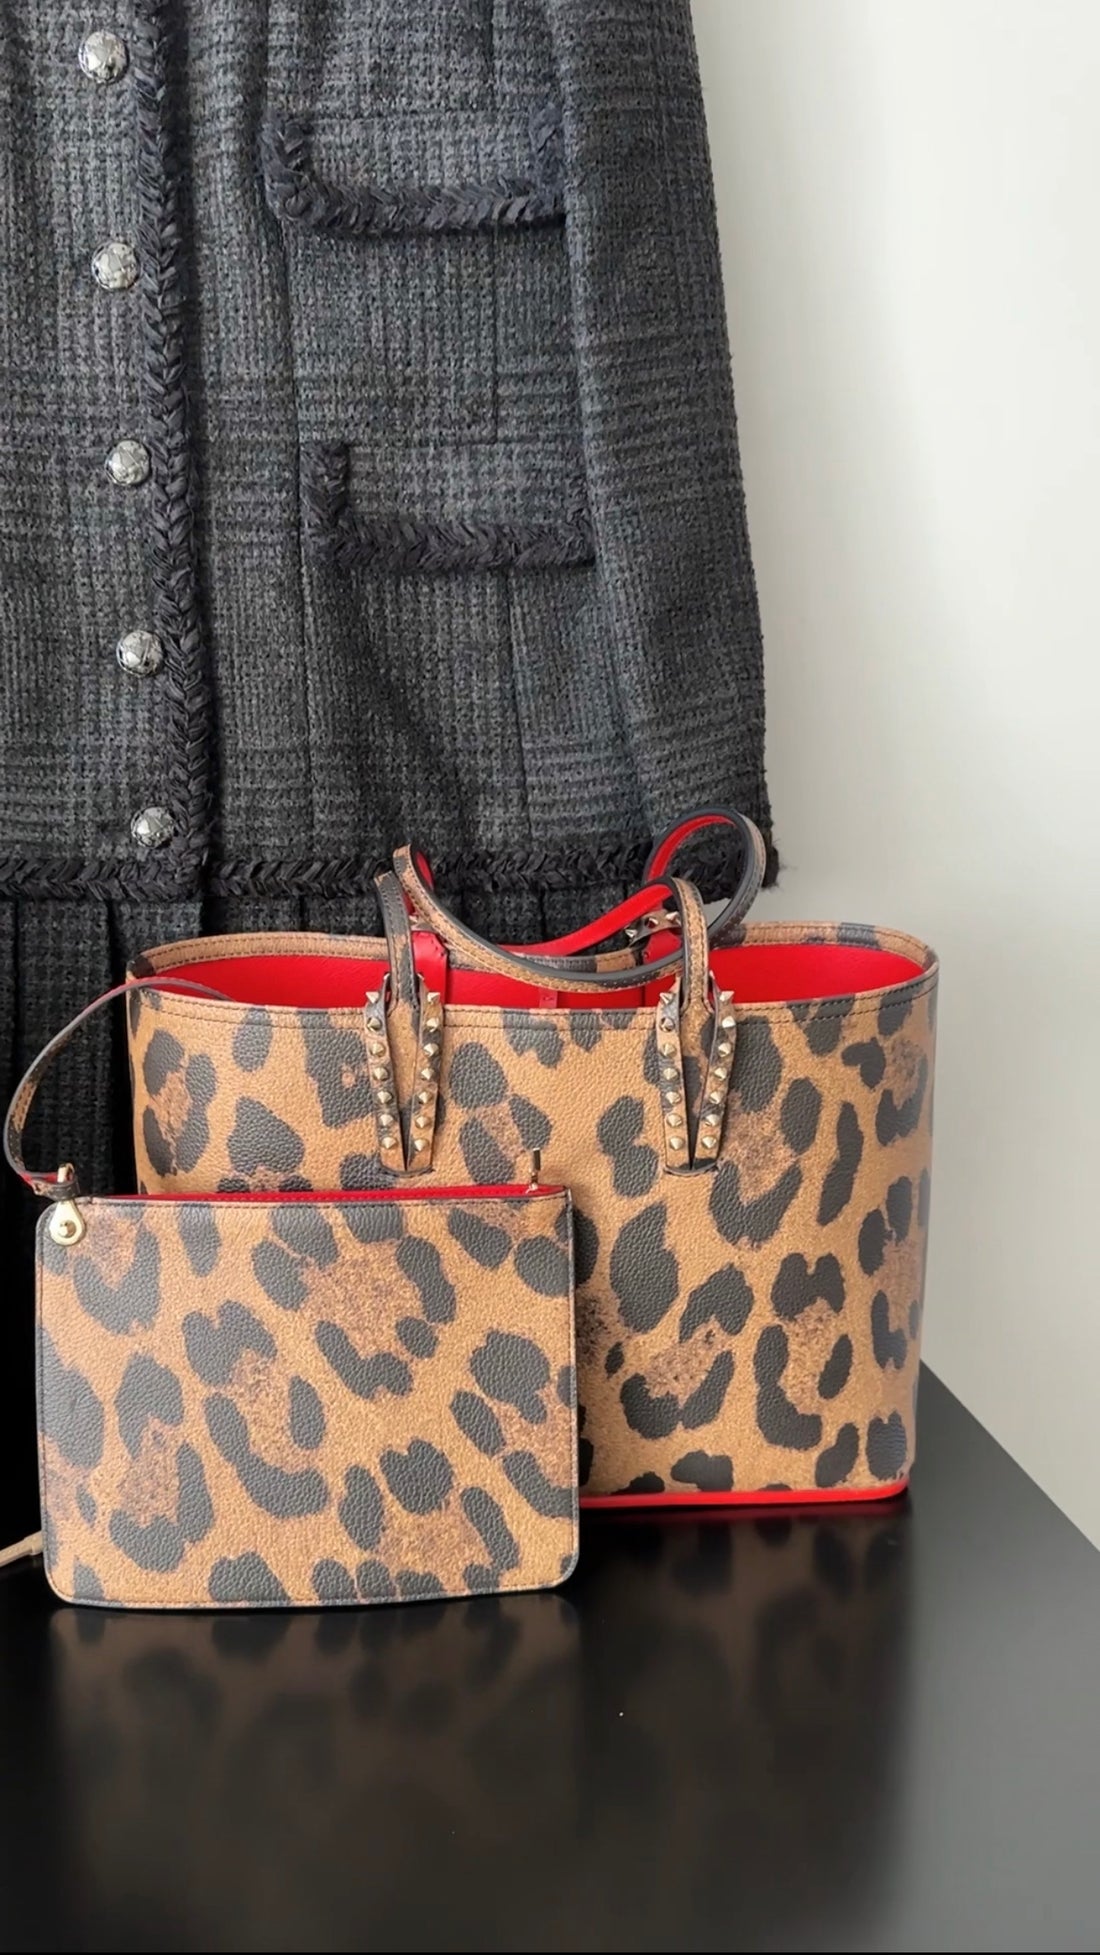 Louboutin Small Cabata Leopard and Red Lined Tote Bag